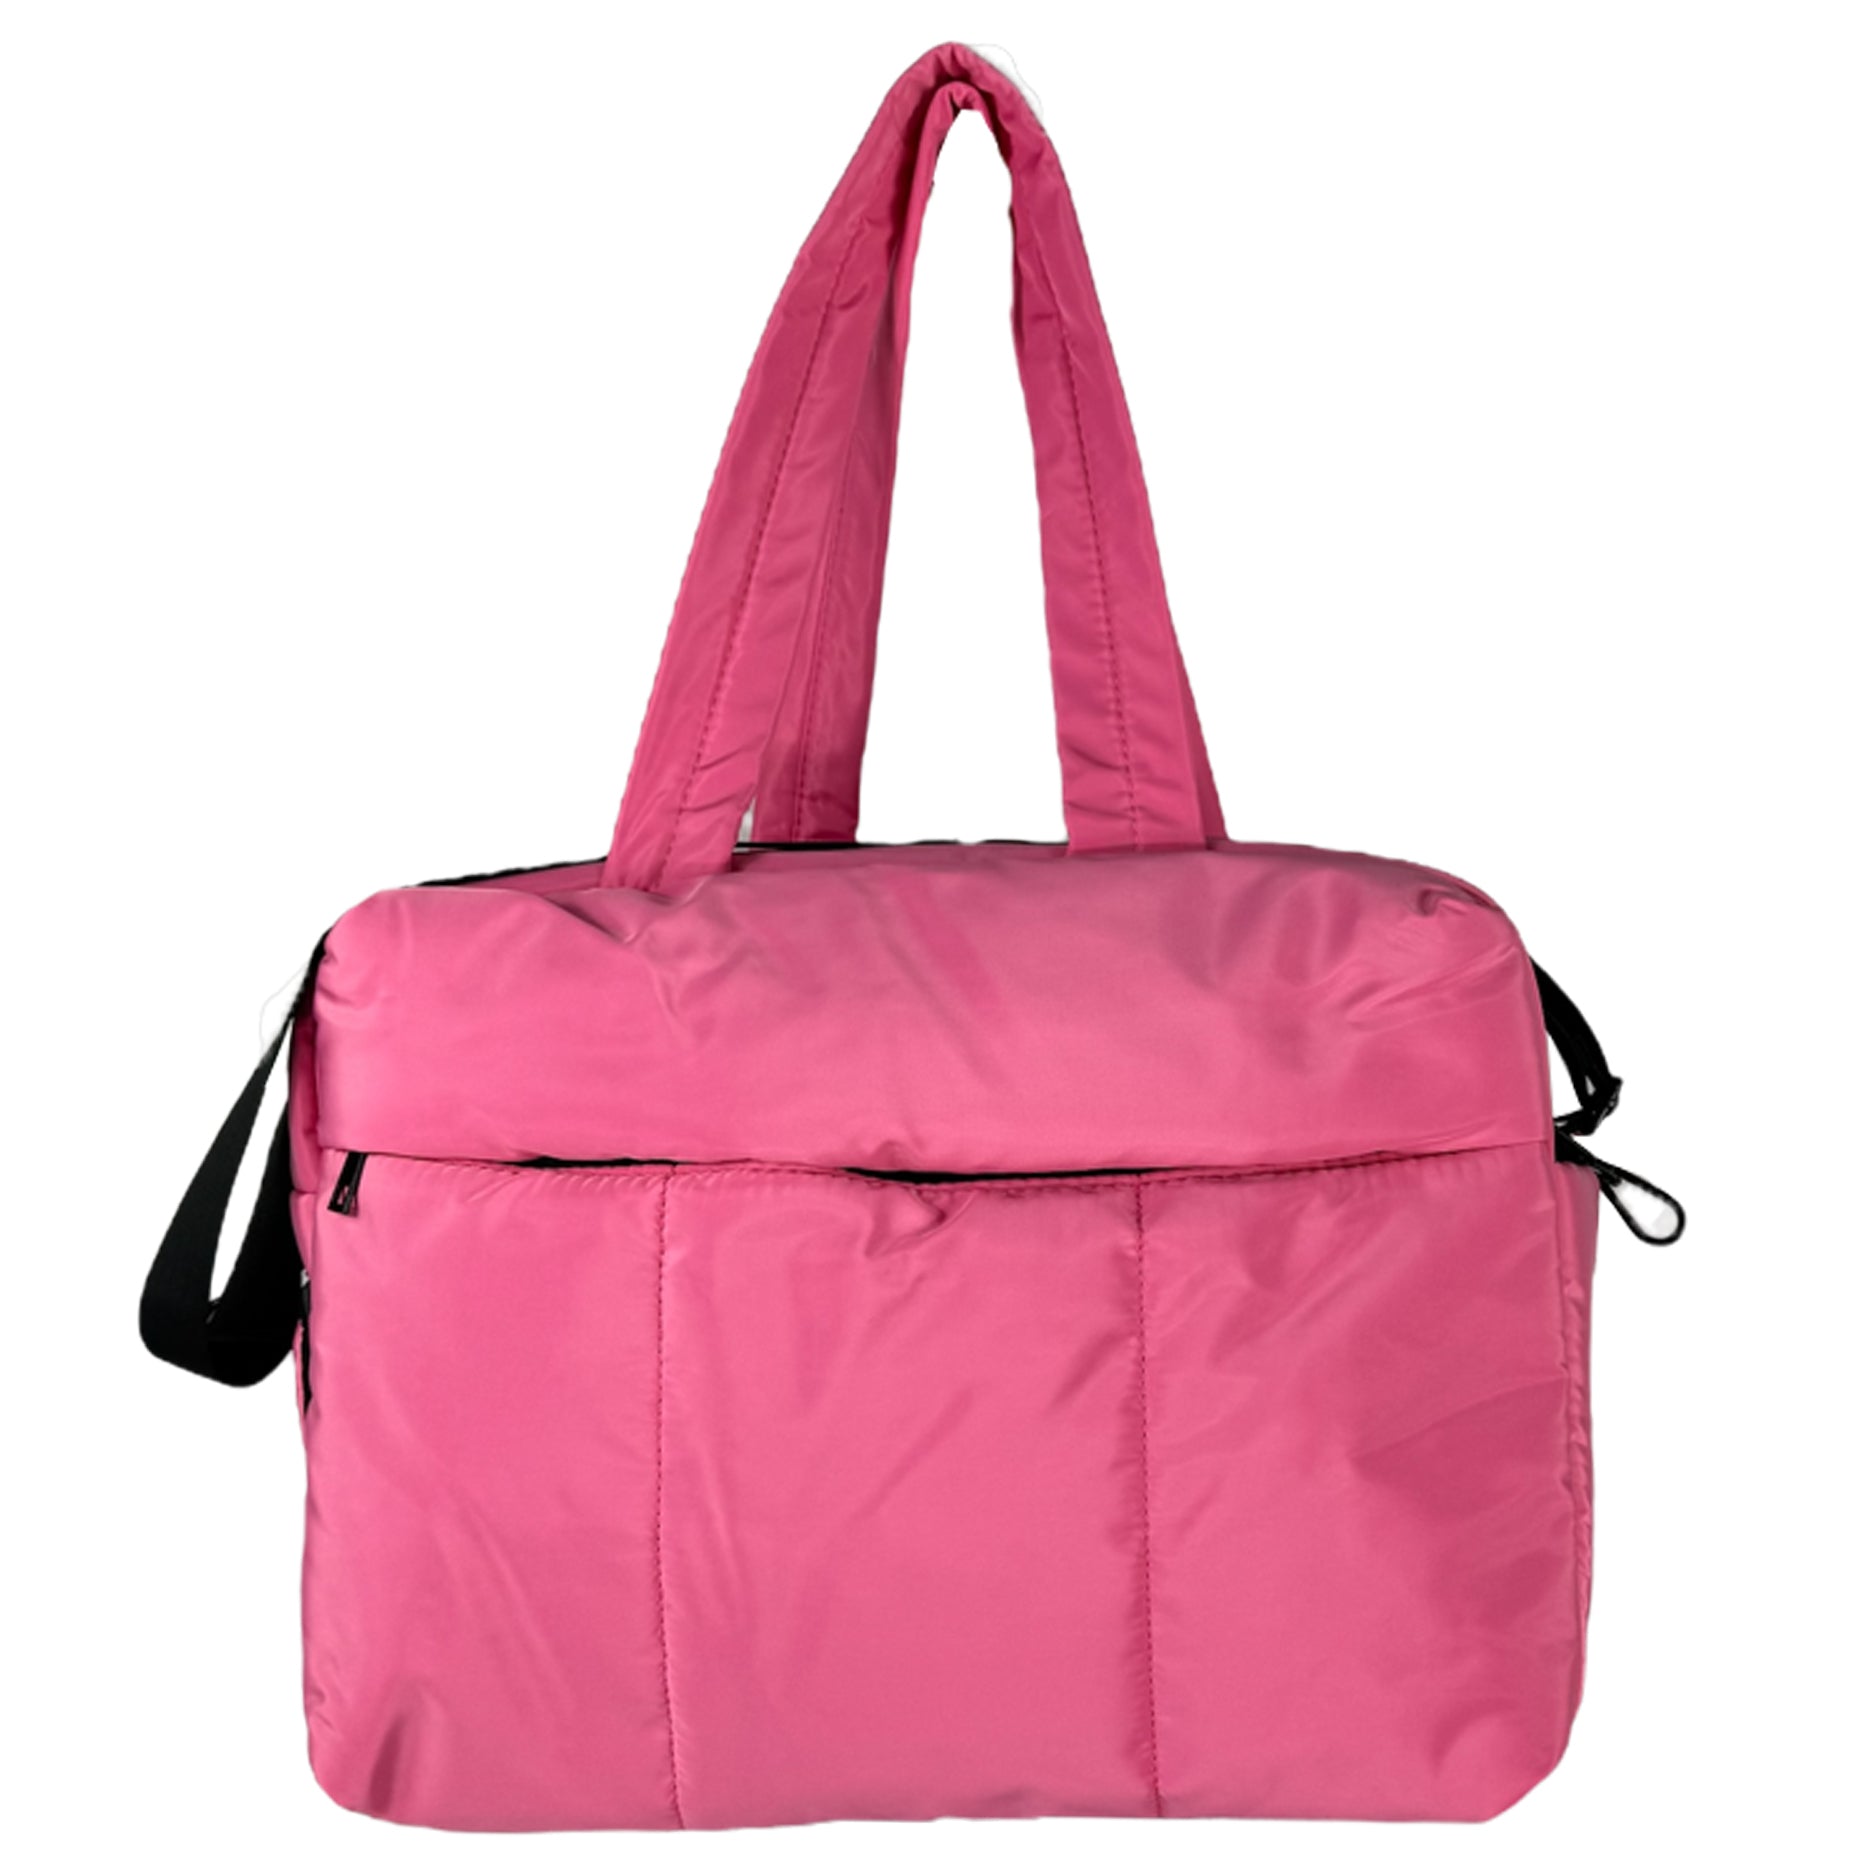 PC-4155 Tote/Duffle Hot Pink